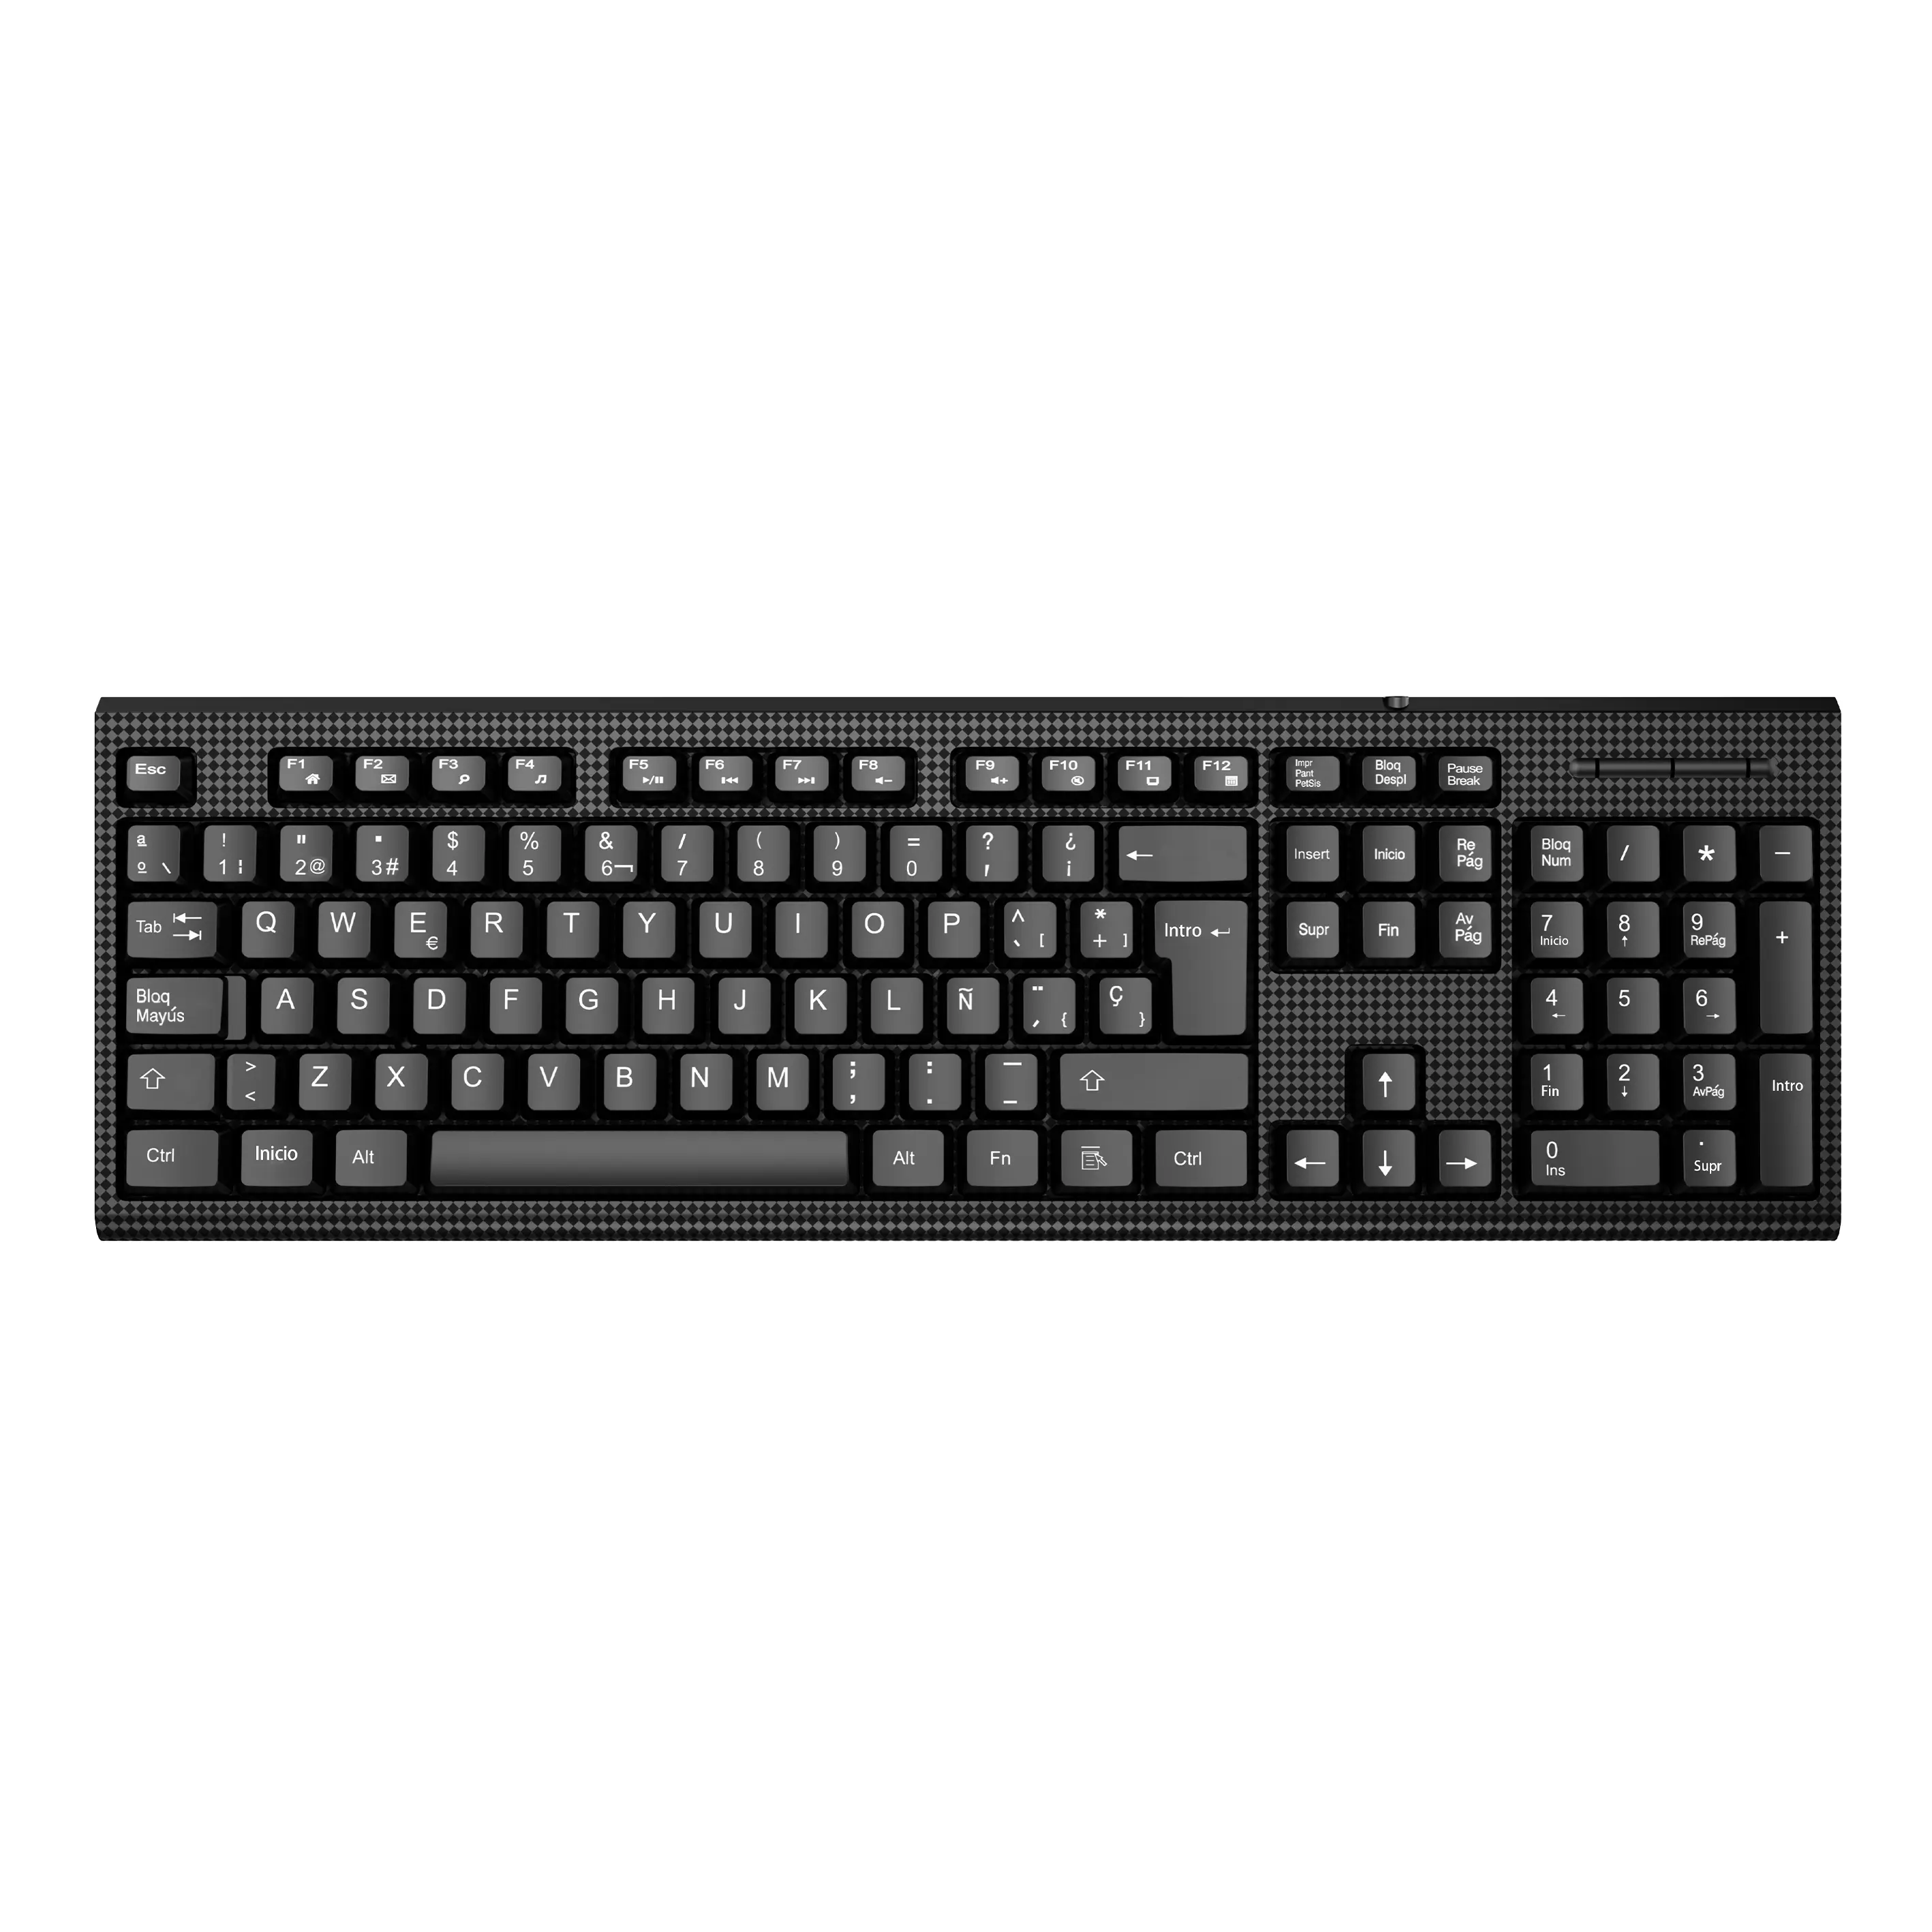 New Wholesale USB 3.0 Wired QWERTY Keyboard Cheap Computer Office Desktop Keyboard With Numeric Keypad And Membrane Operation